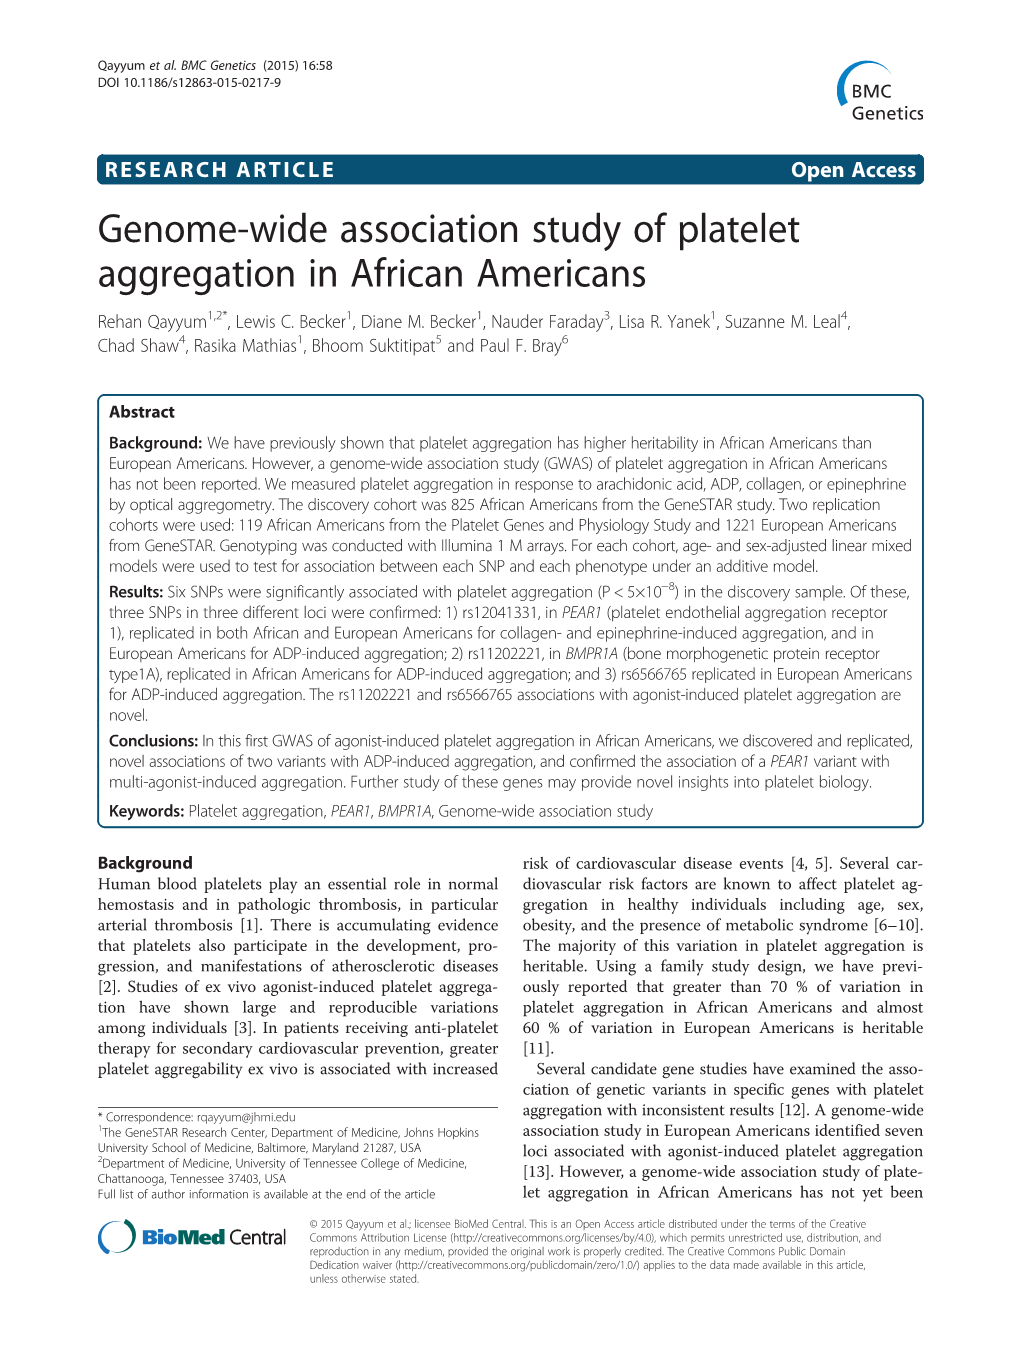 Genome-Wide Association Study of Platelet Aggregation in African Americans Rehan Qayyum1,2*, Lewis C